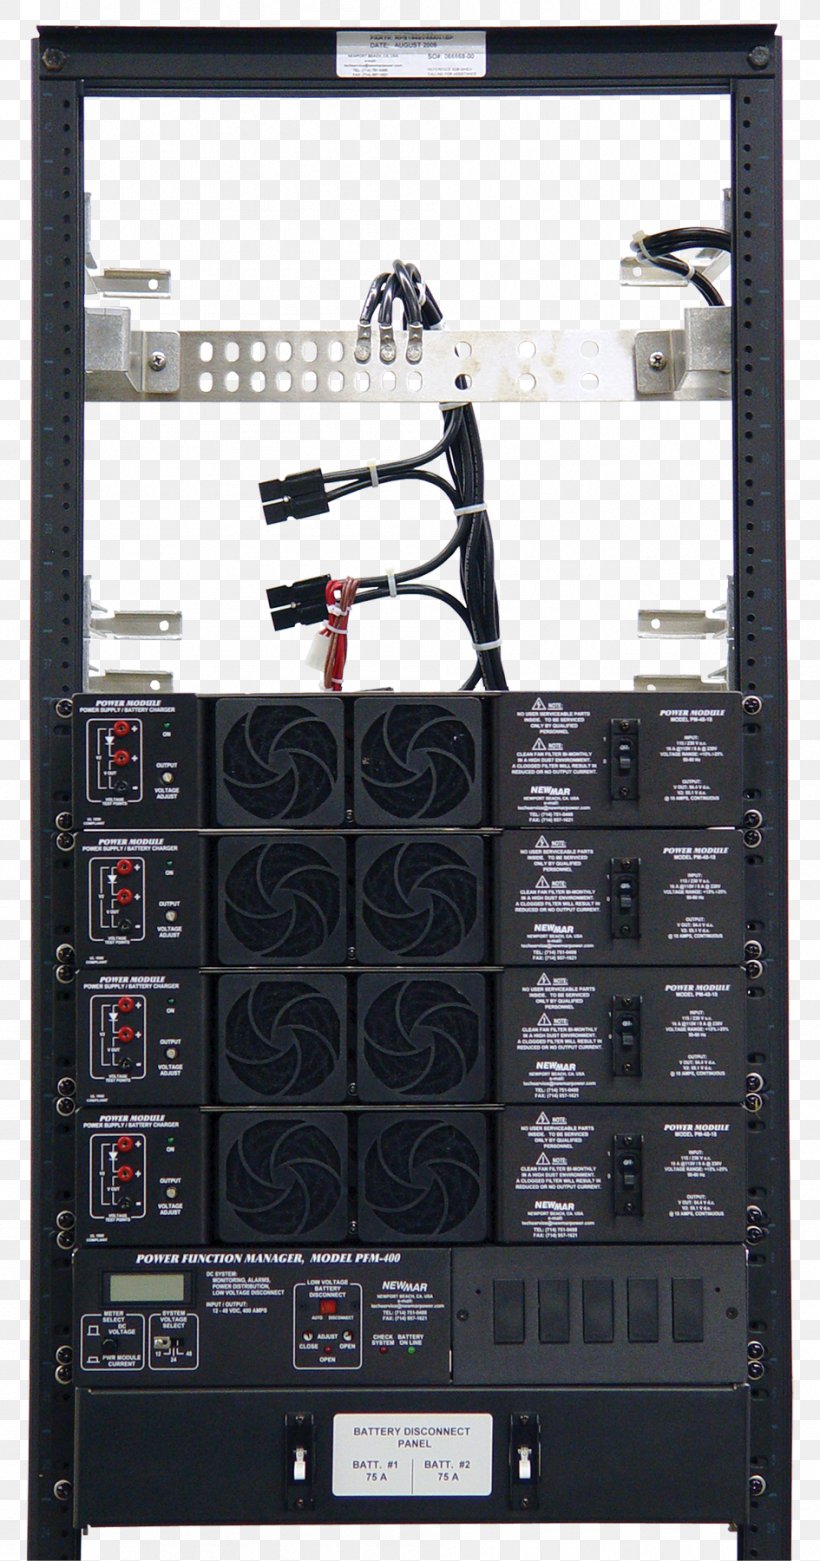 Computer Cases & Housings Electric Power System 19-inch Rack, PNG, 945x1800px, 19inch Rack, Computer Cases Housings, Alternating Current, Cable Management, Computer Case Download Free